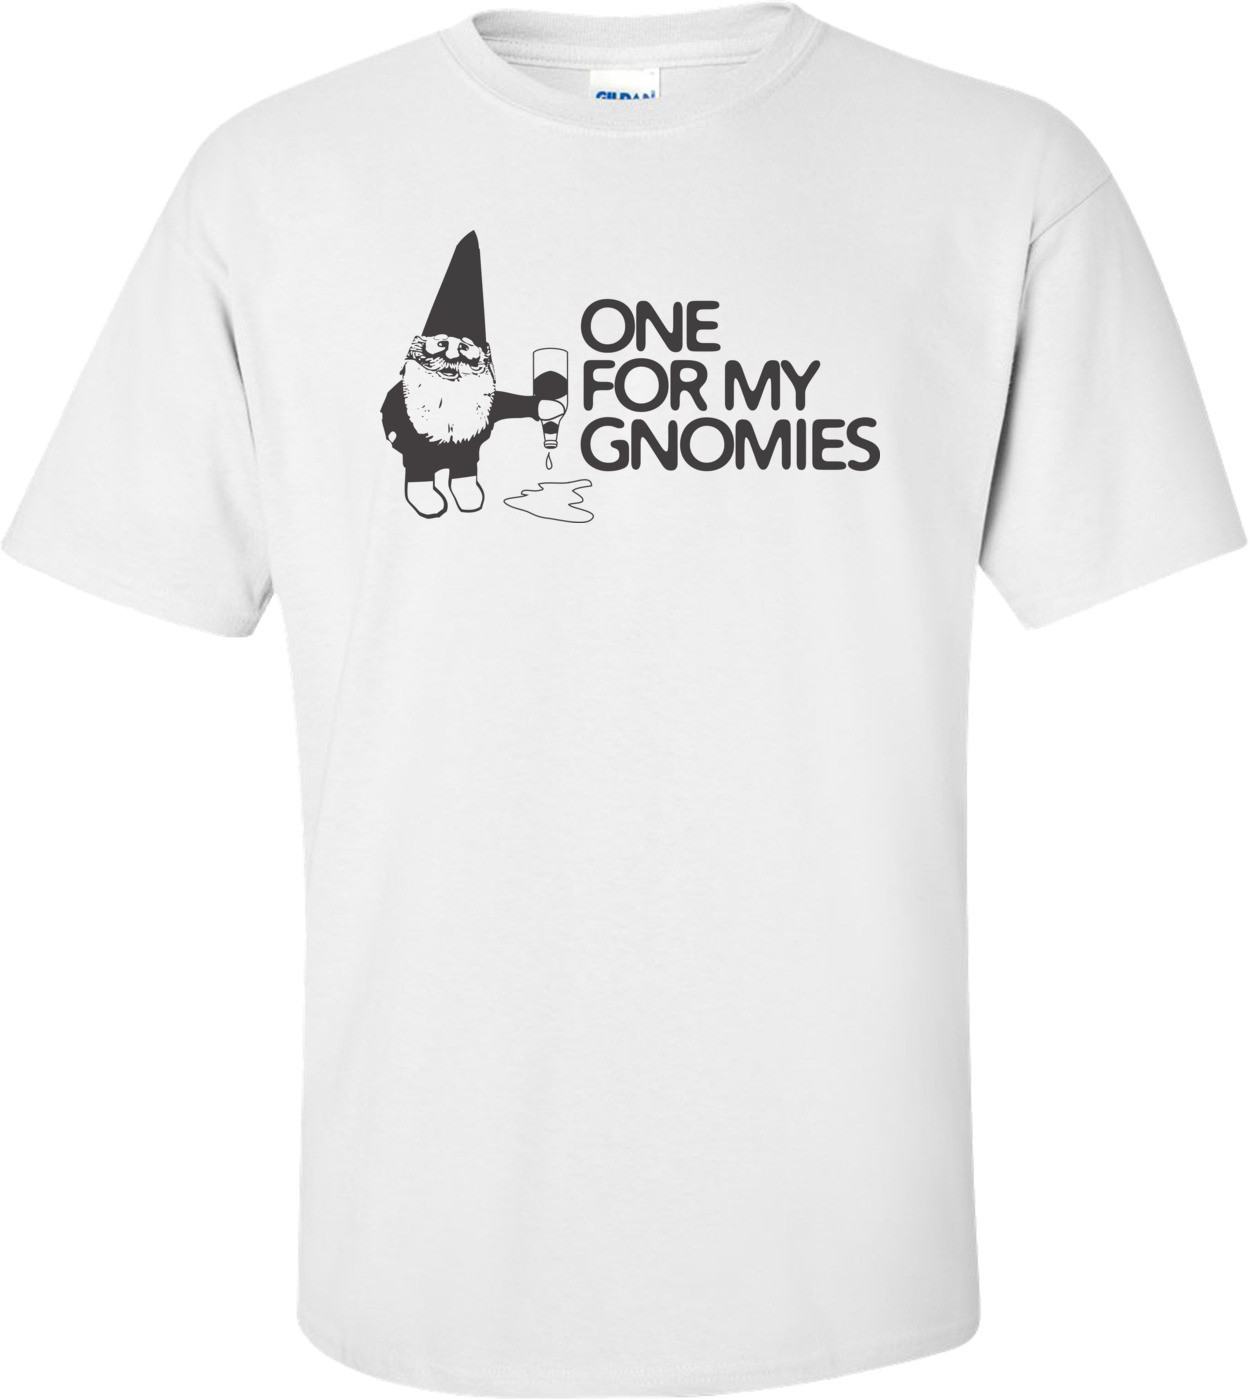 One For My Gnomies Shirt